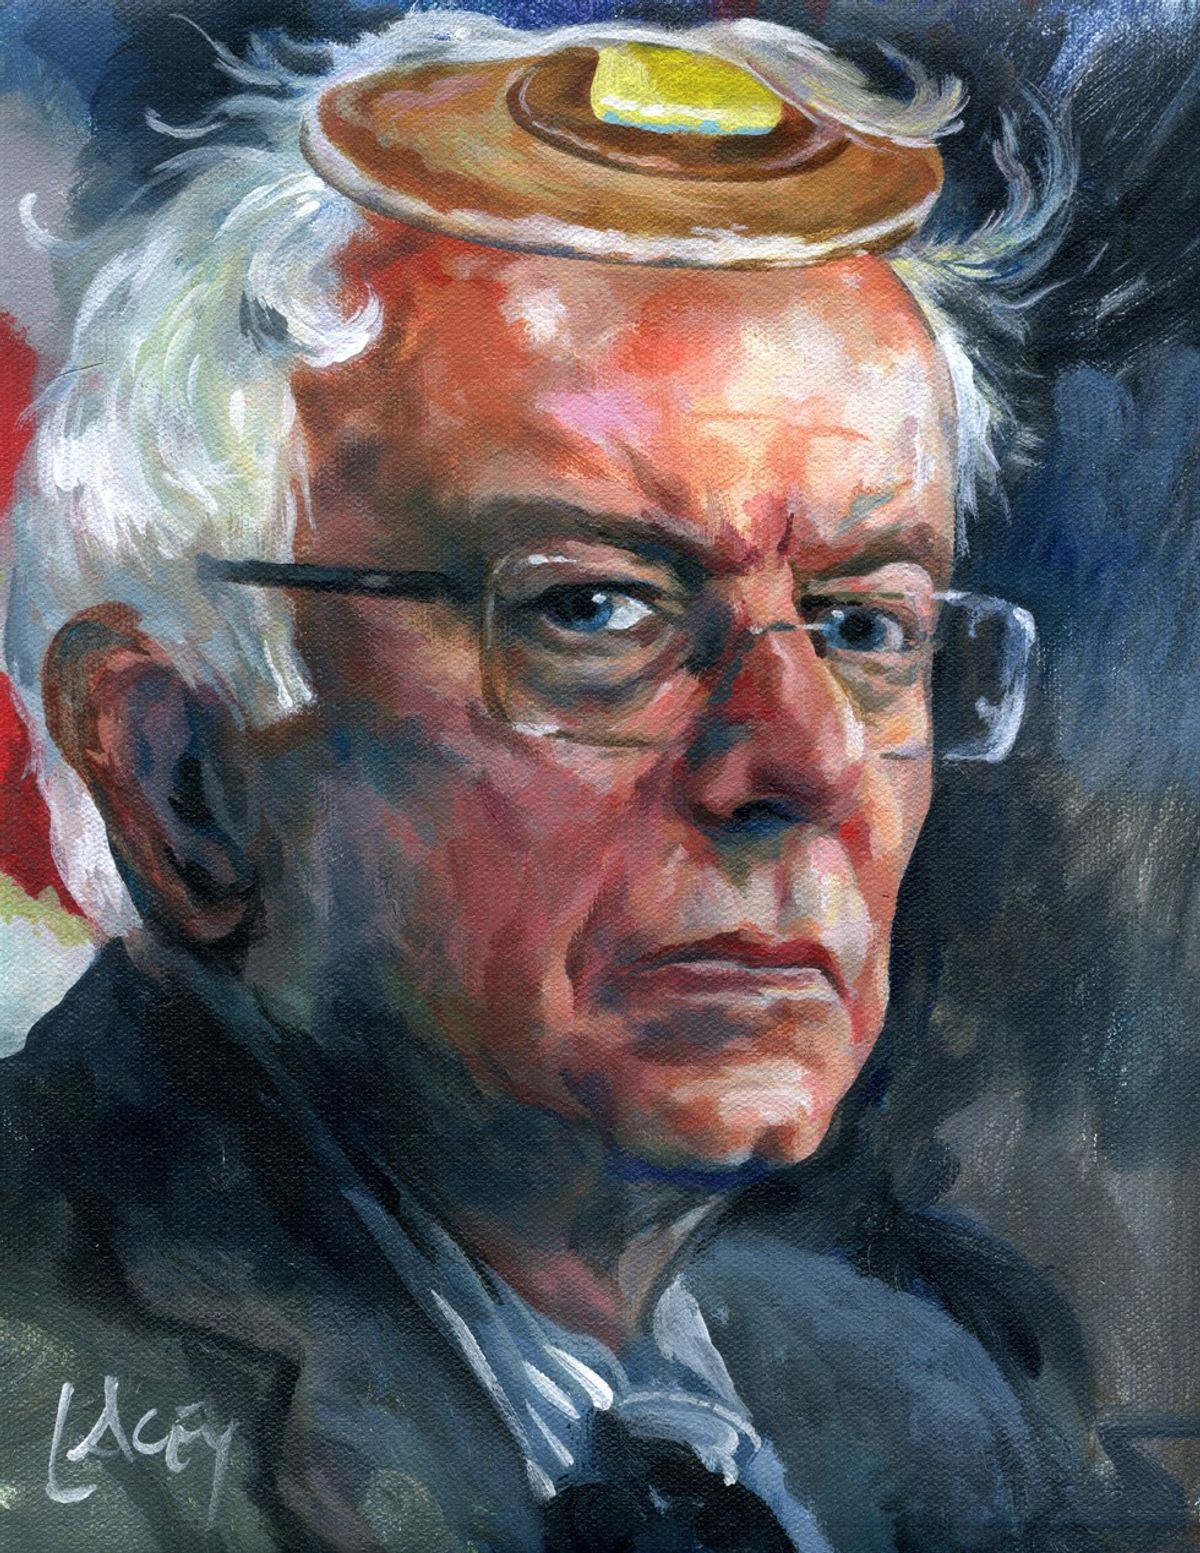 Are You Feeling The #Bern?